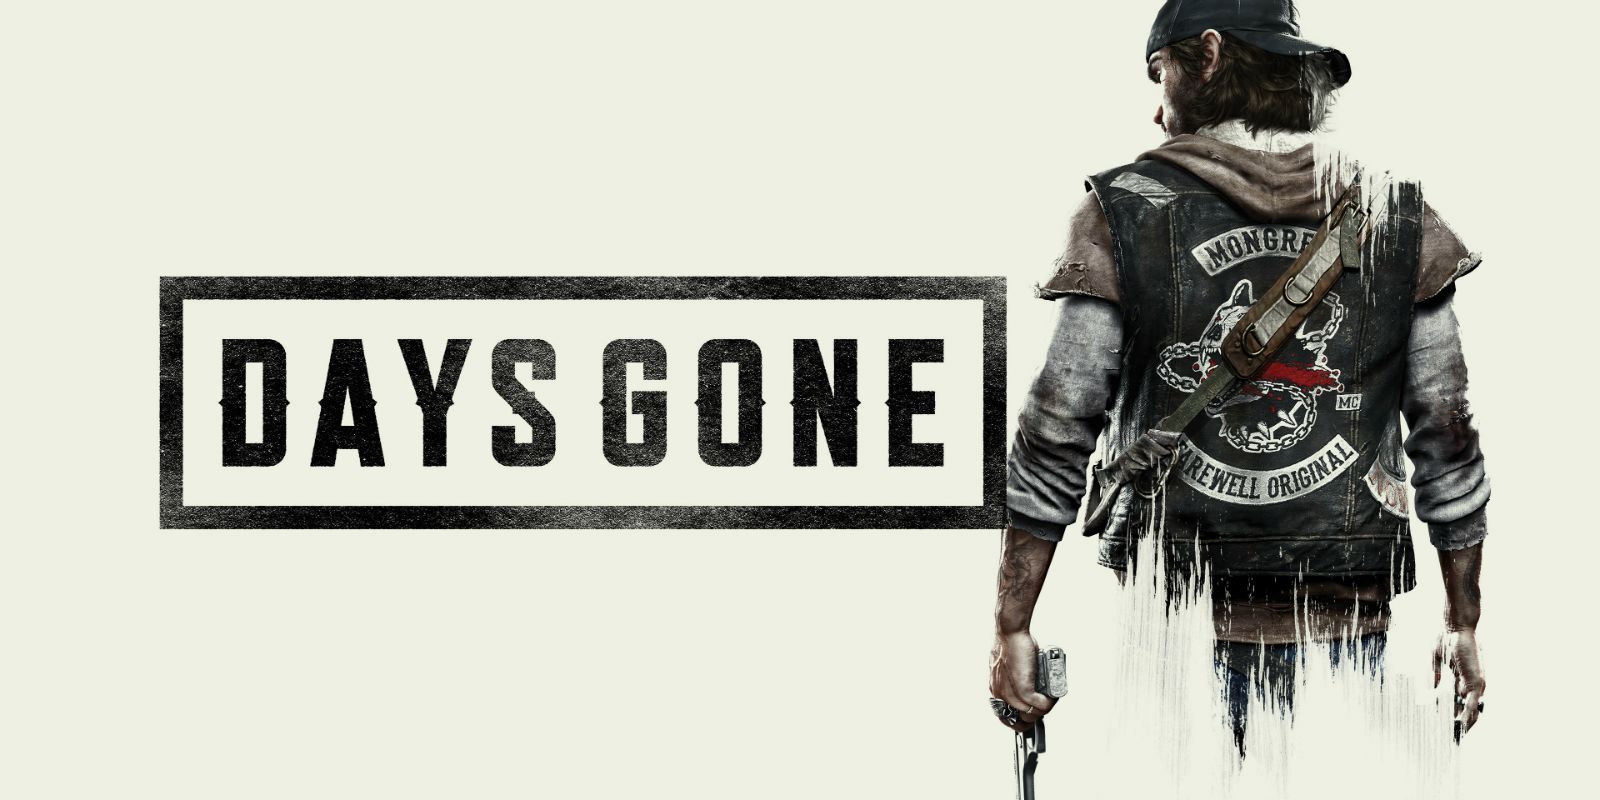 Days Gone promo art featuring Deacon St. John with his back turned.